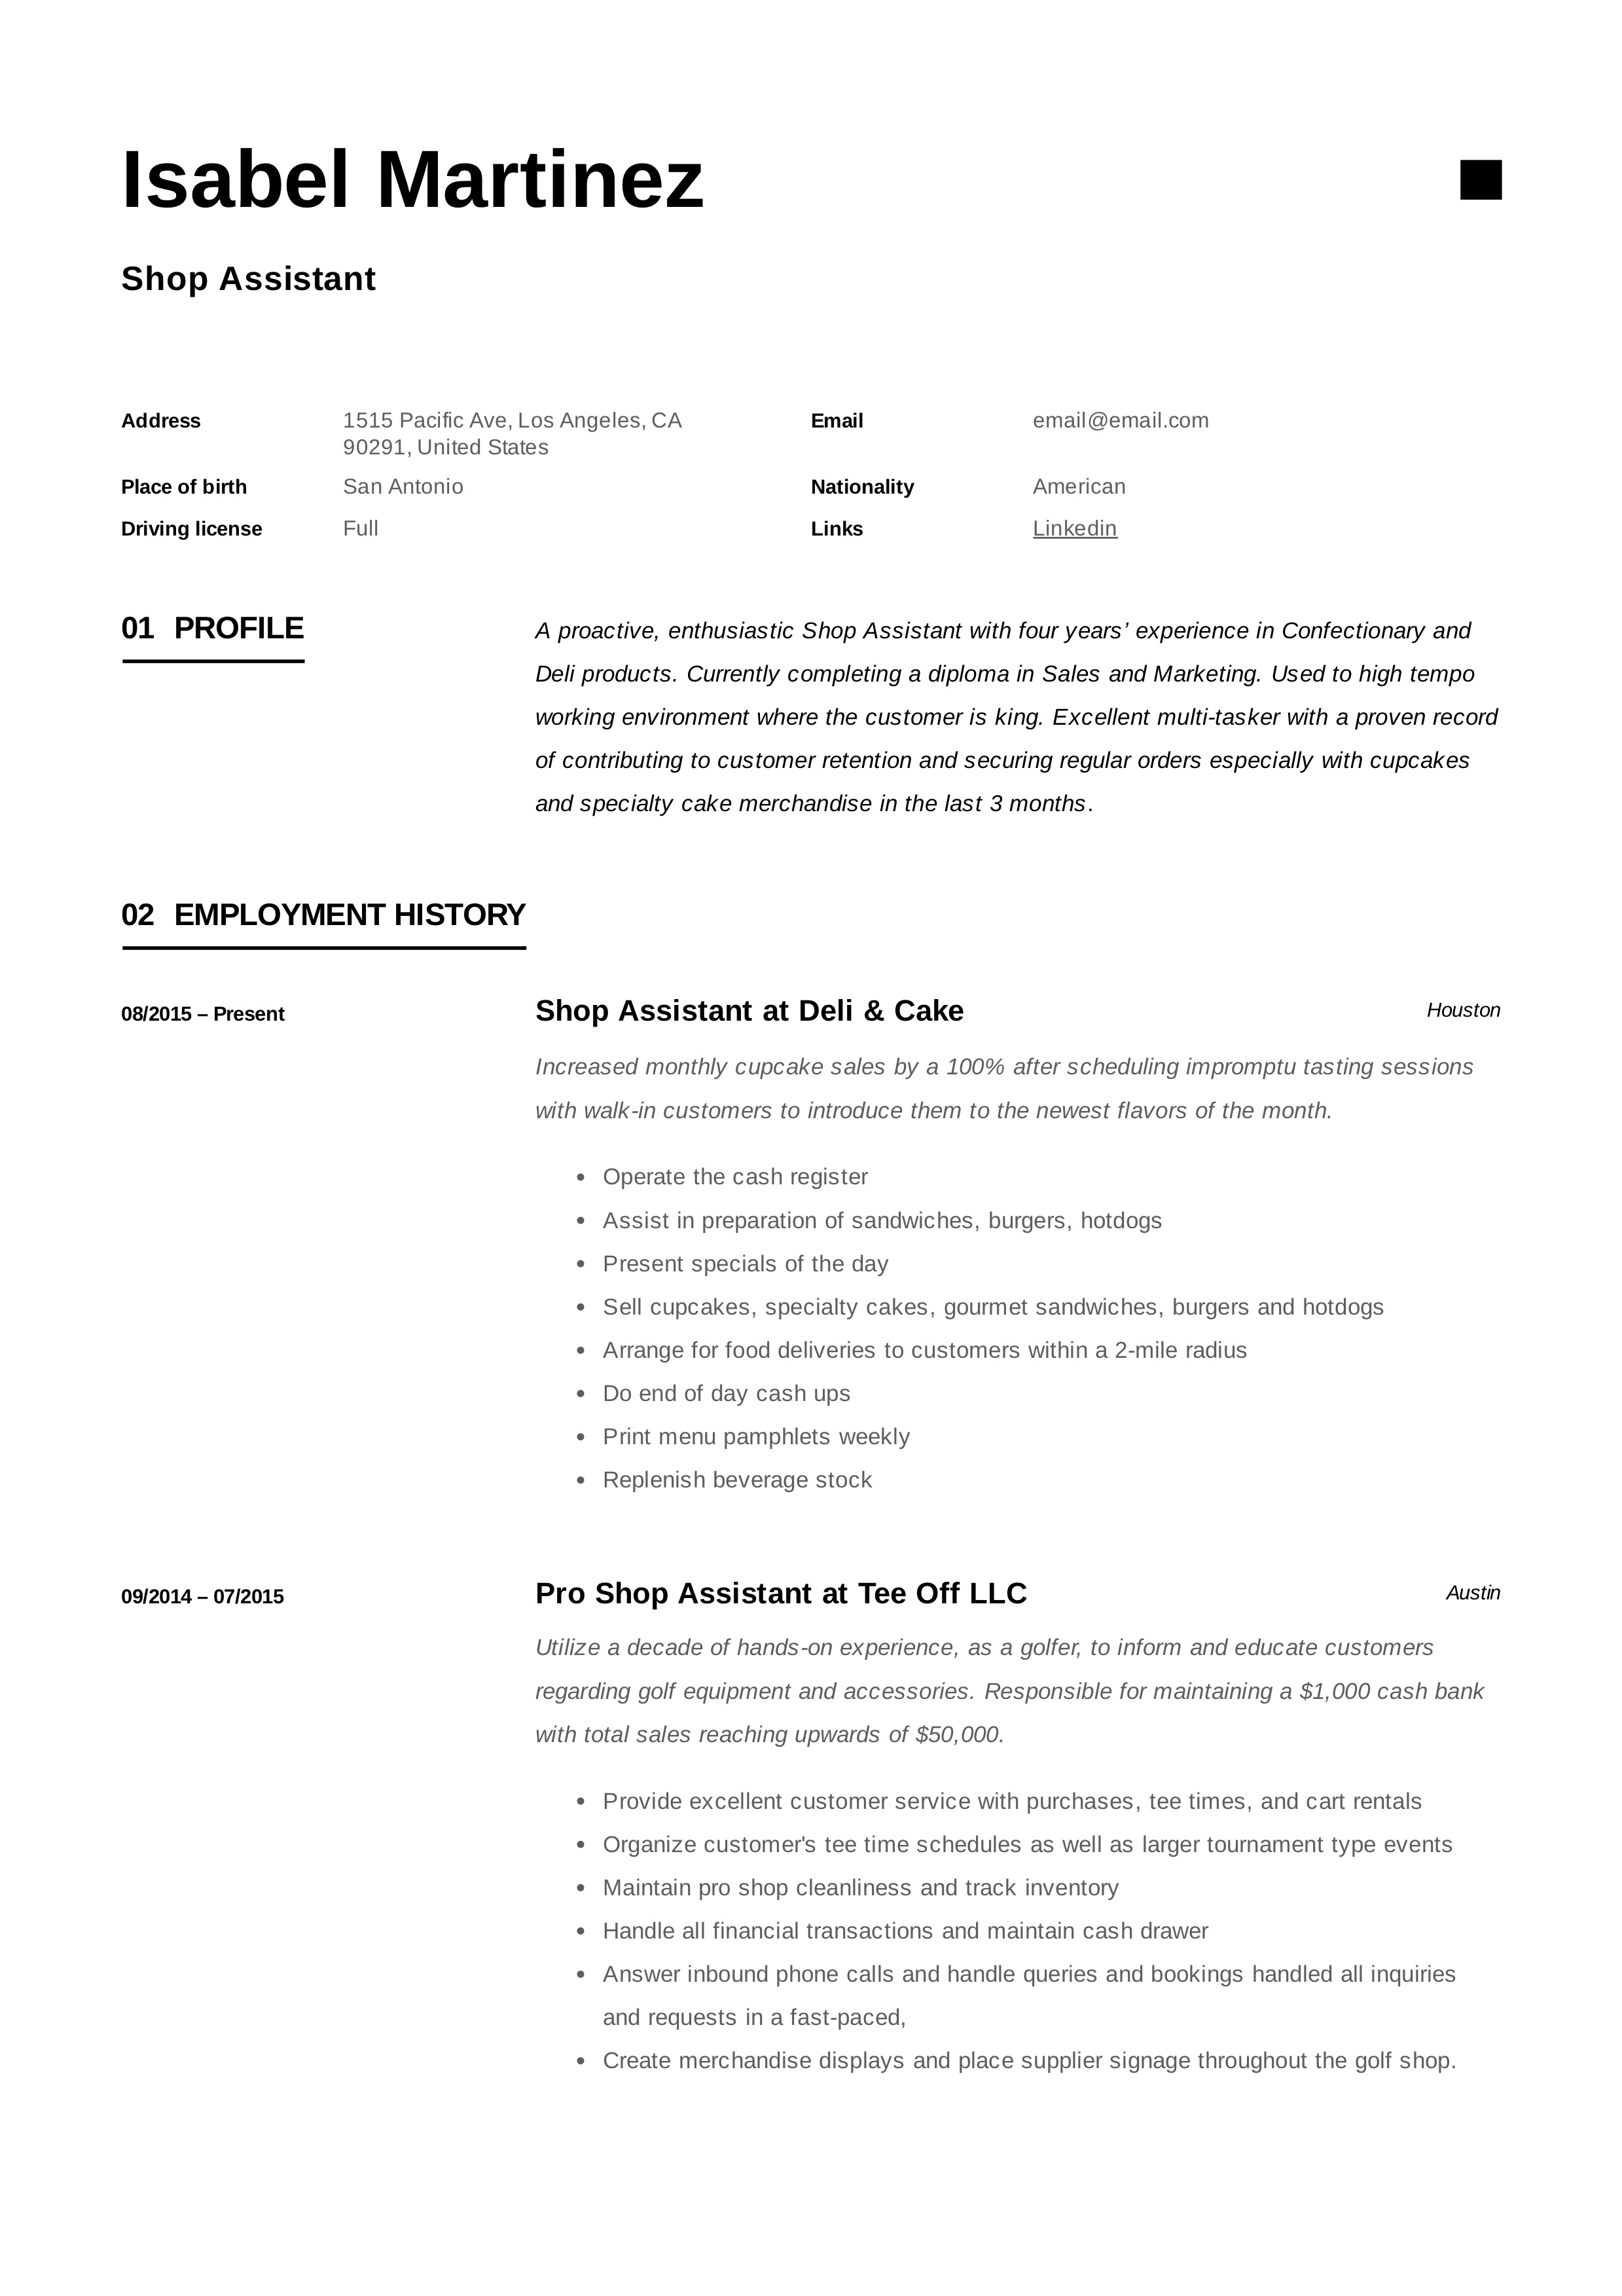 shop assistant resume example  u0026 writing guide